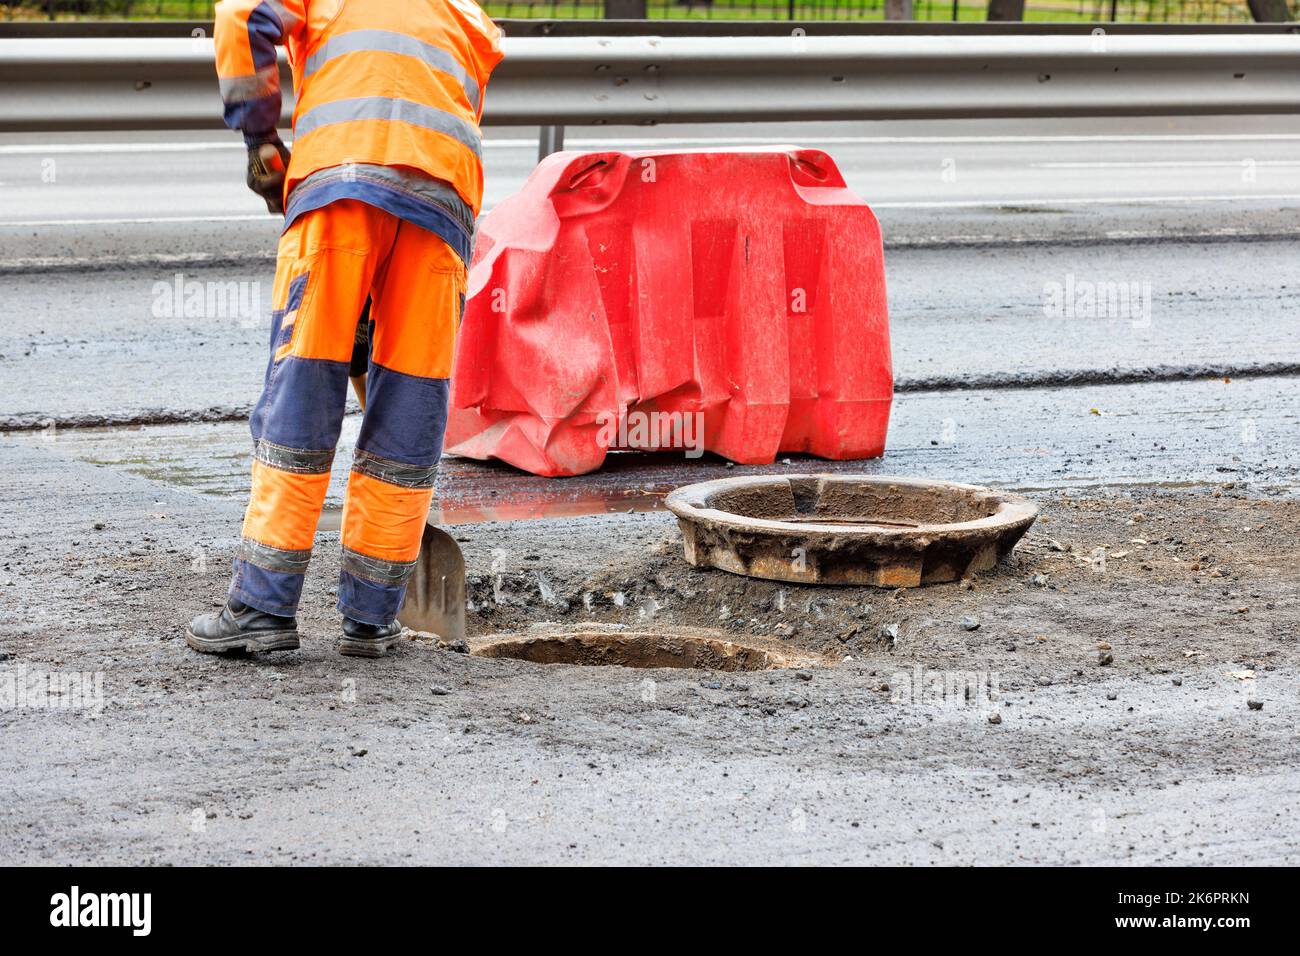 A road worker in orange overalls clears the mouth of a sewer manhole on the carriageway with a shovel for its subsequent repair. Copy space. Stock Photo